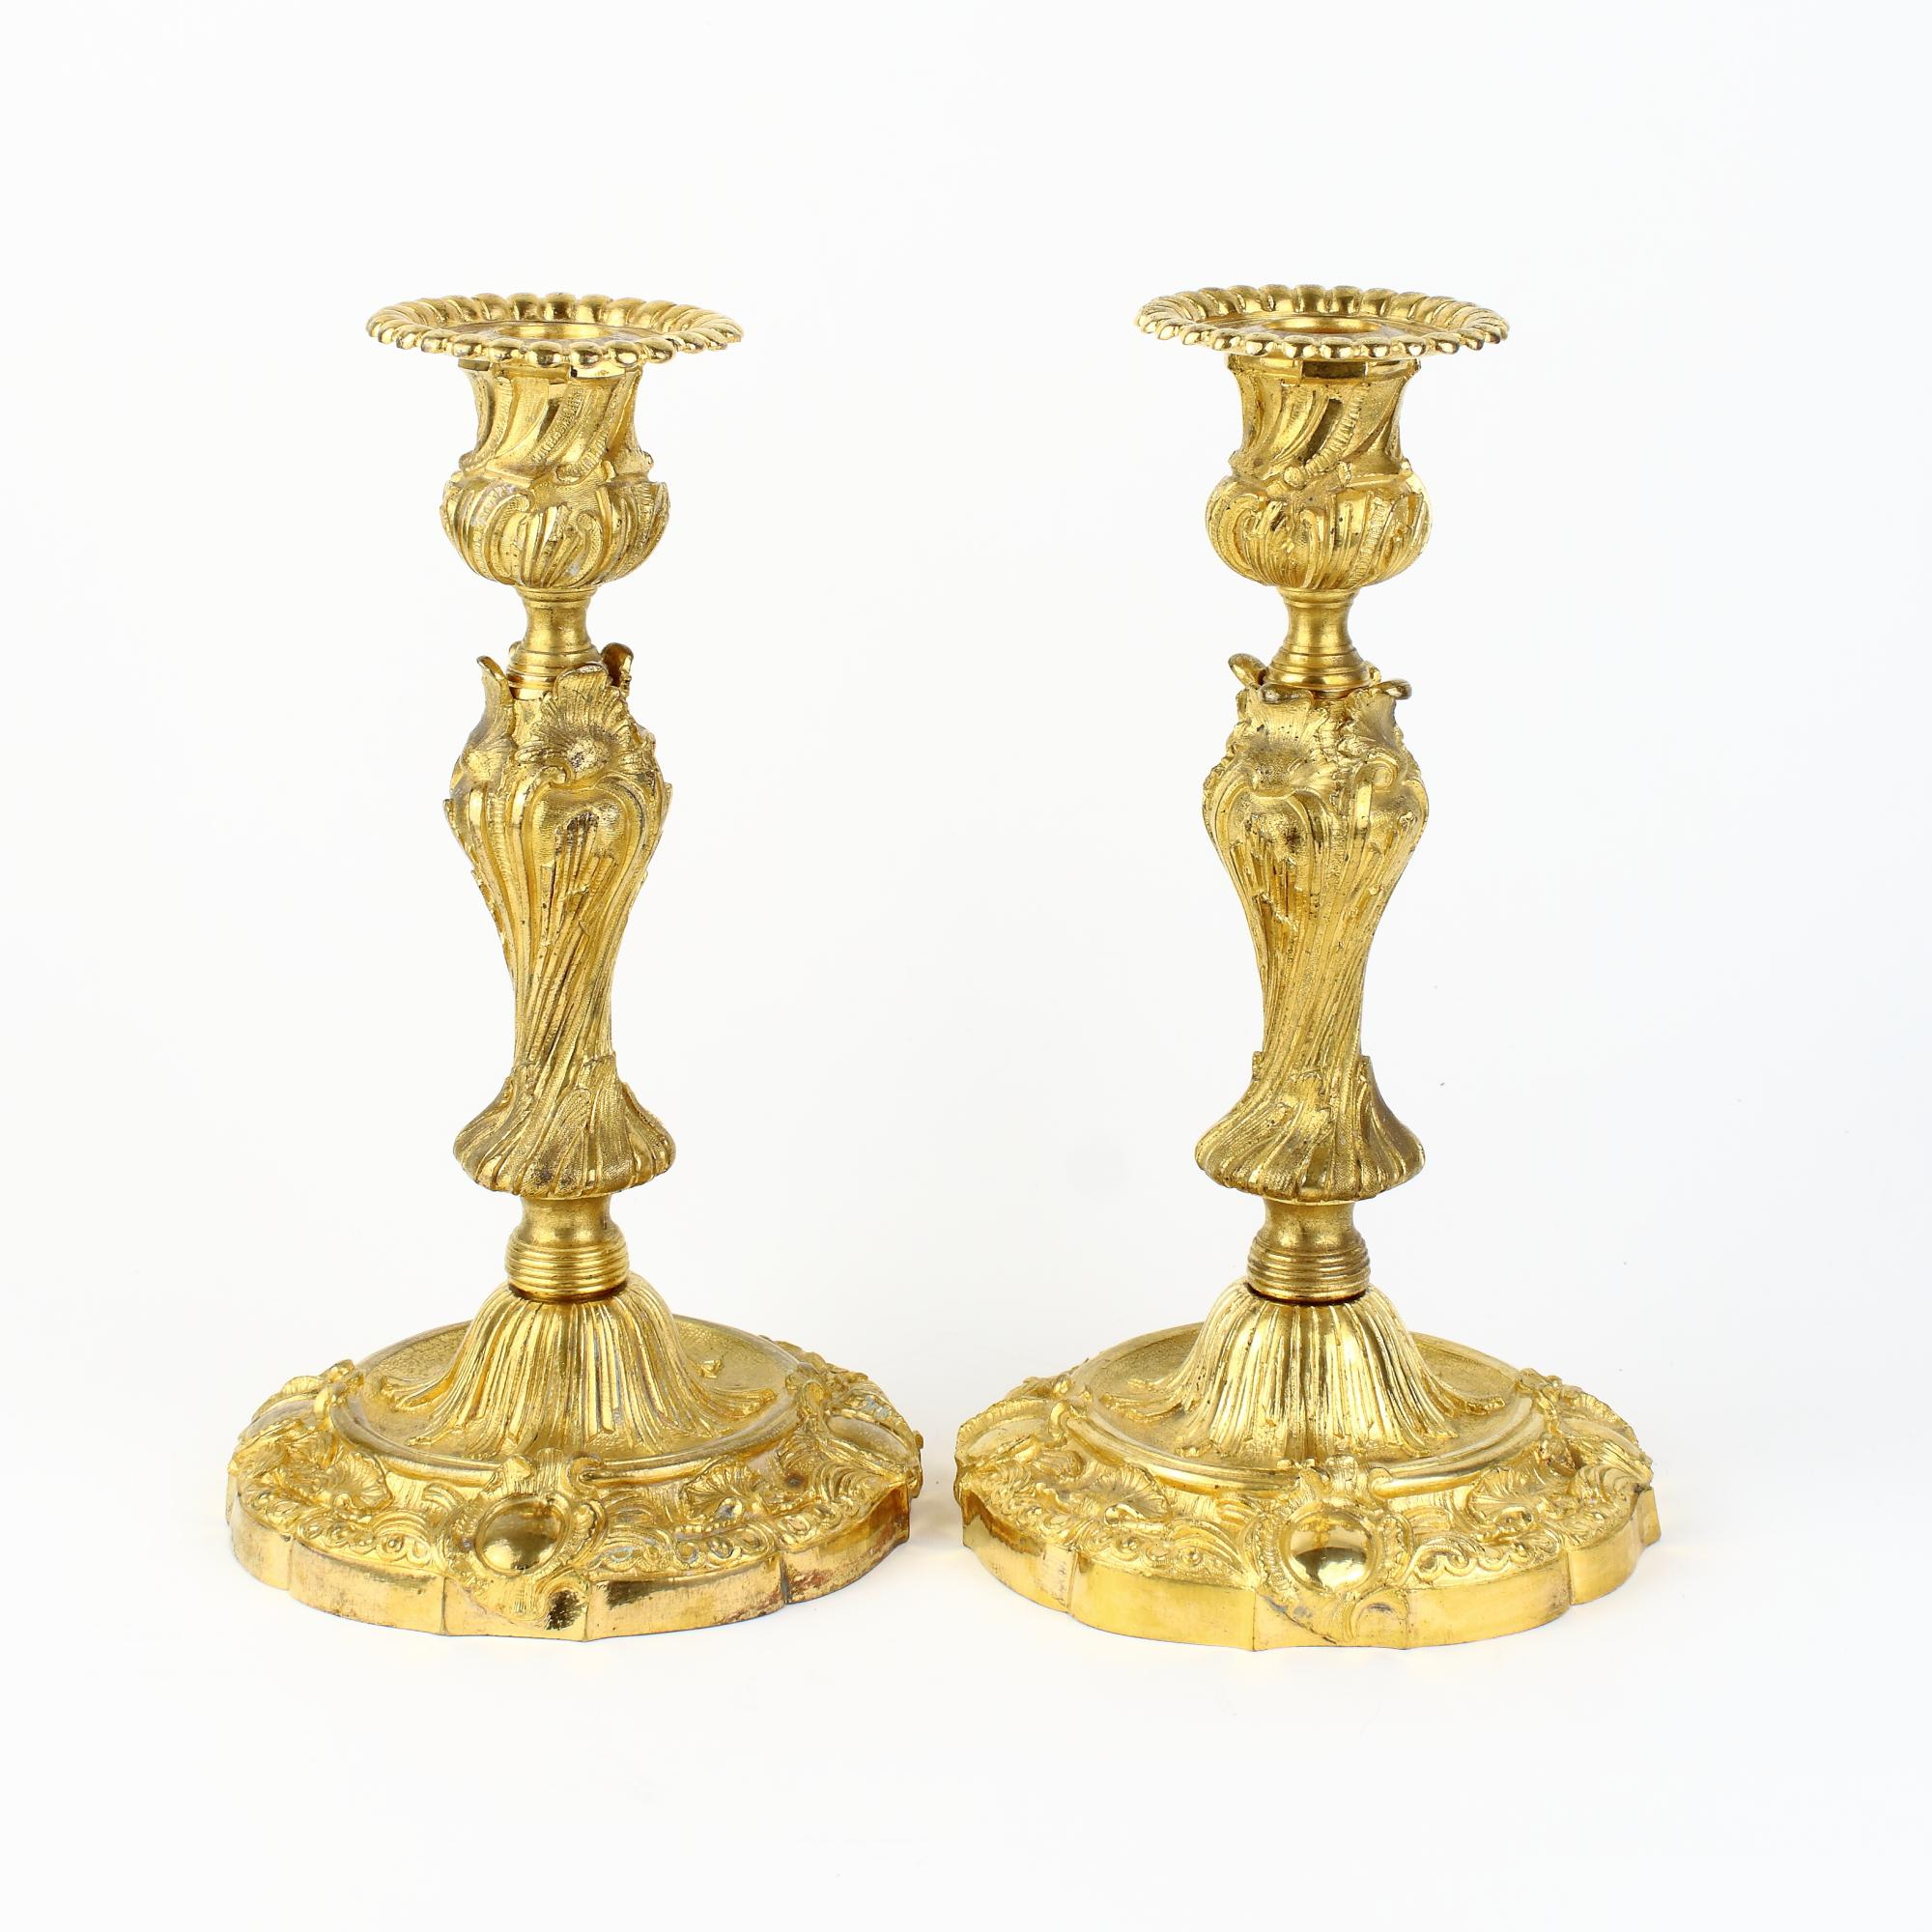 Mid 19th Century French Henri Picard Pair of Louis XV Gilt Bronze Candlesticks For Sale 1